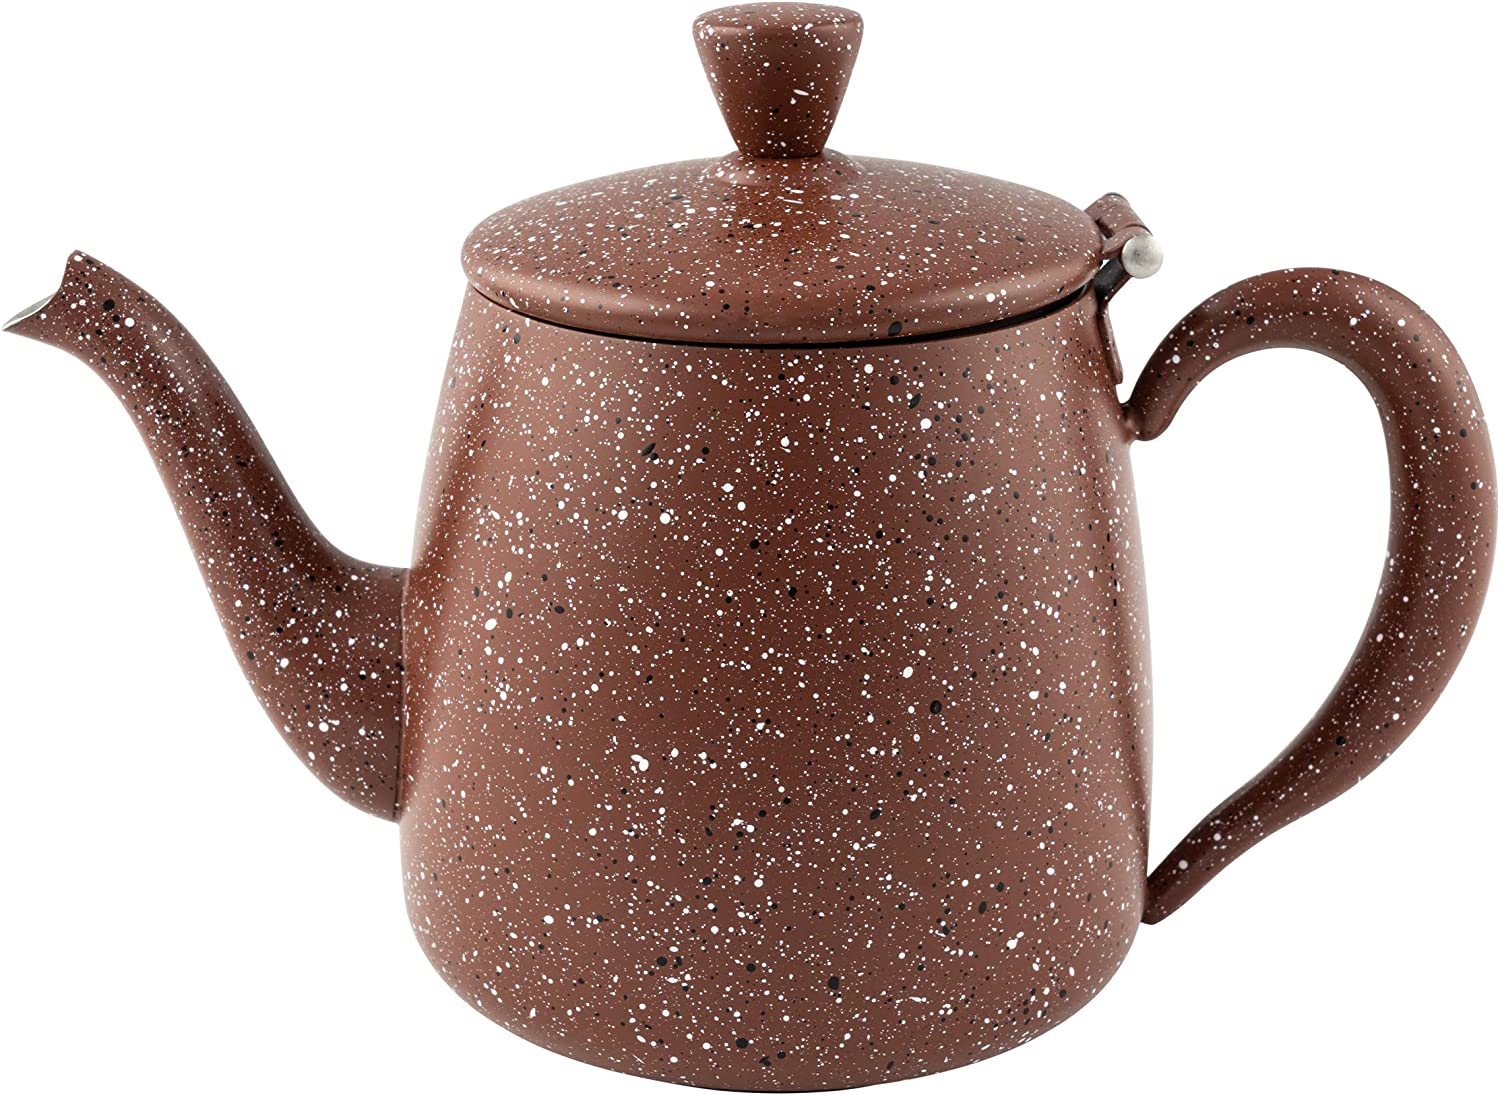 Cafe Ole Café Olé PT-035RG Premium 35oz 1L High Quality Stainless Steel Teapot - Red Granite, Drip Free Pouring, Hollow Handles & Hinged Lid, 1 Litre